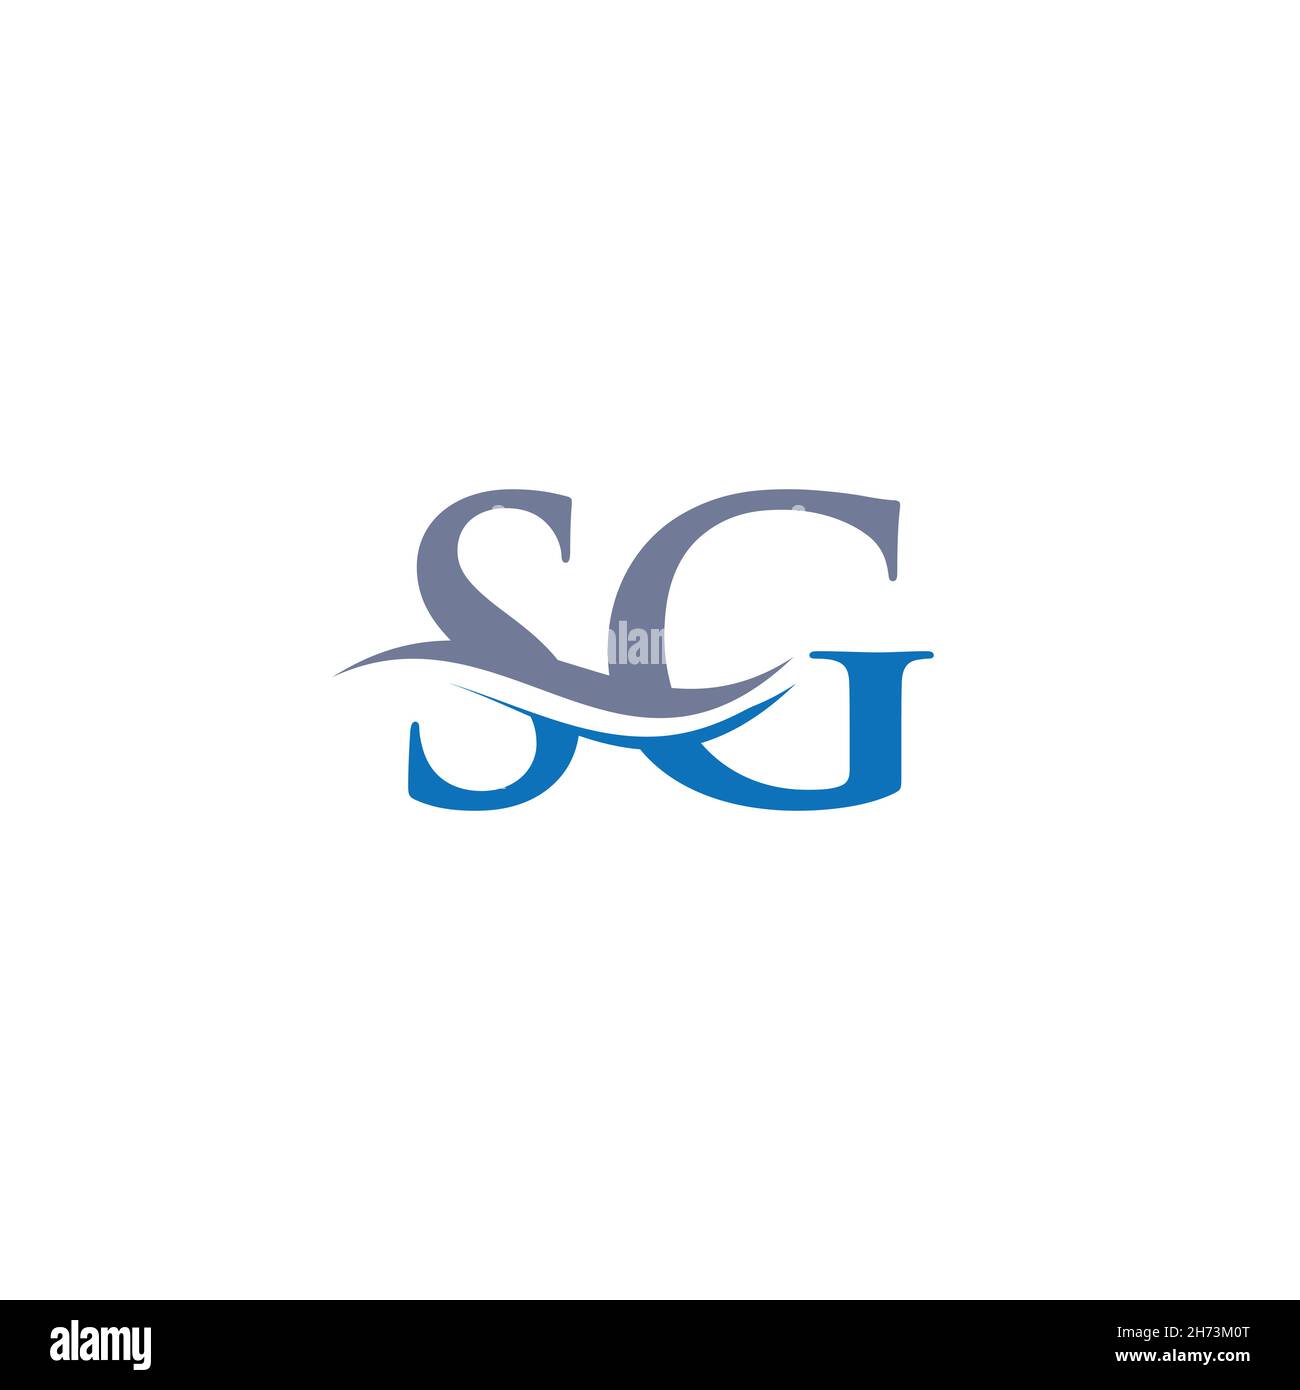 Water Wave SG Logo Vector. Swoosh Letter SG Logo Design for business and company identity. Stock Vector